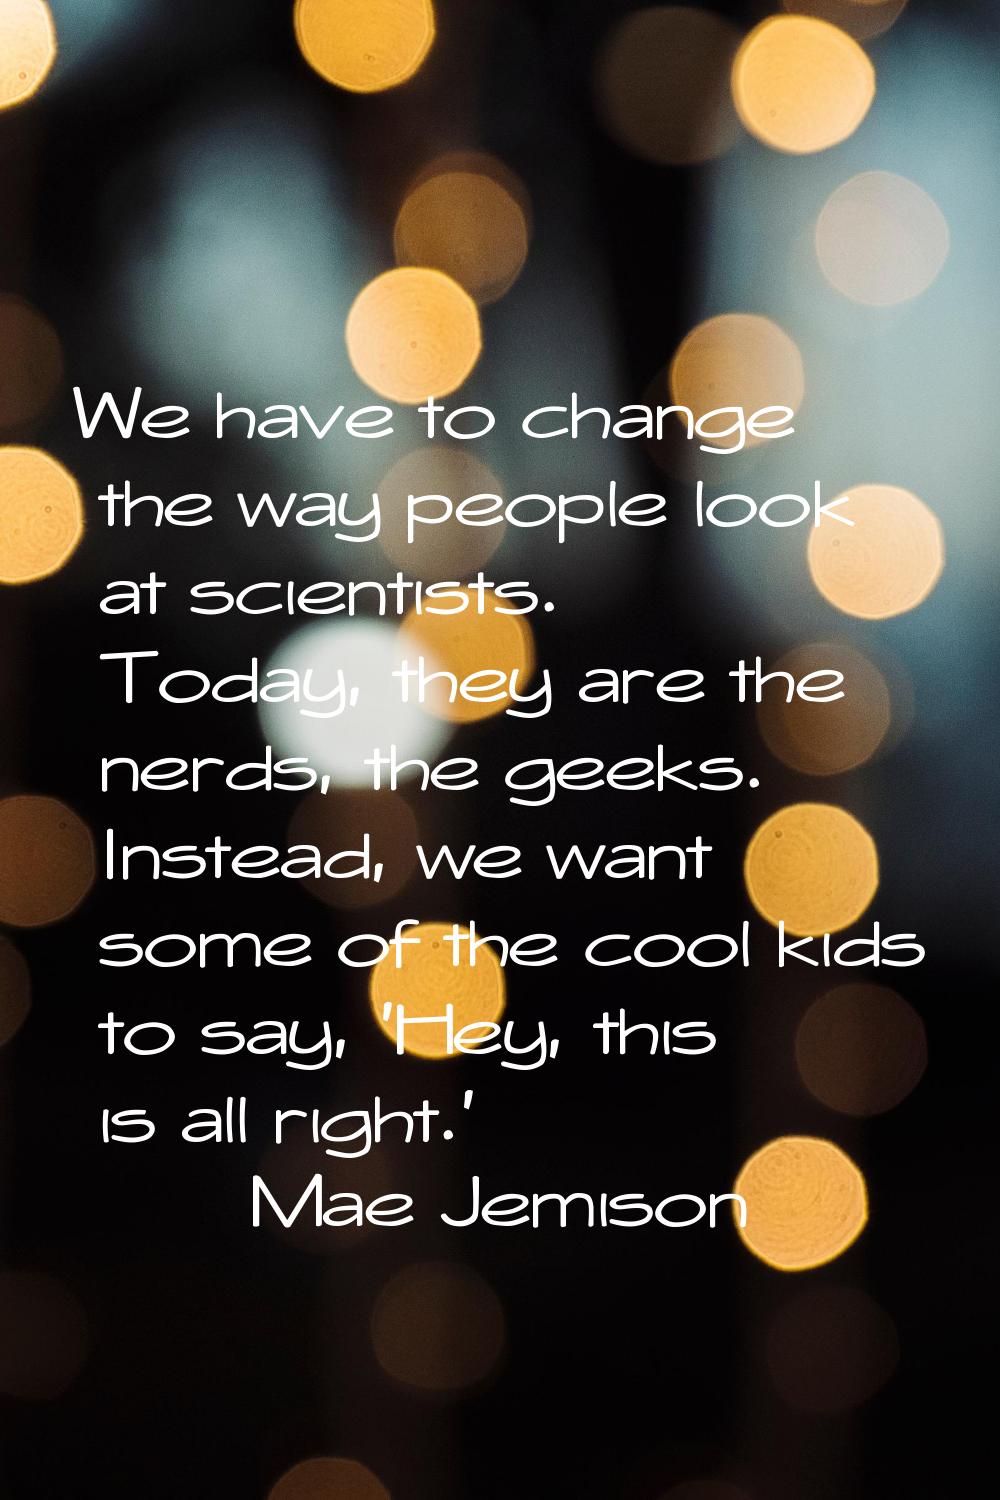 We have to change the way people look at scientists. Today, they are the nerds, the geeks. Instead,